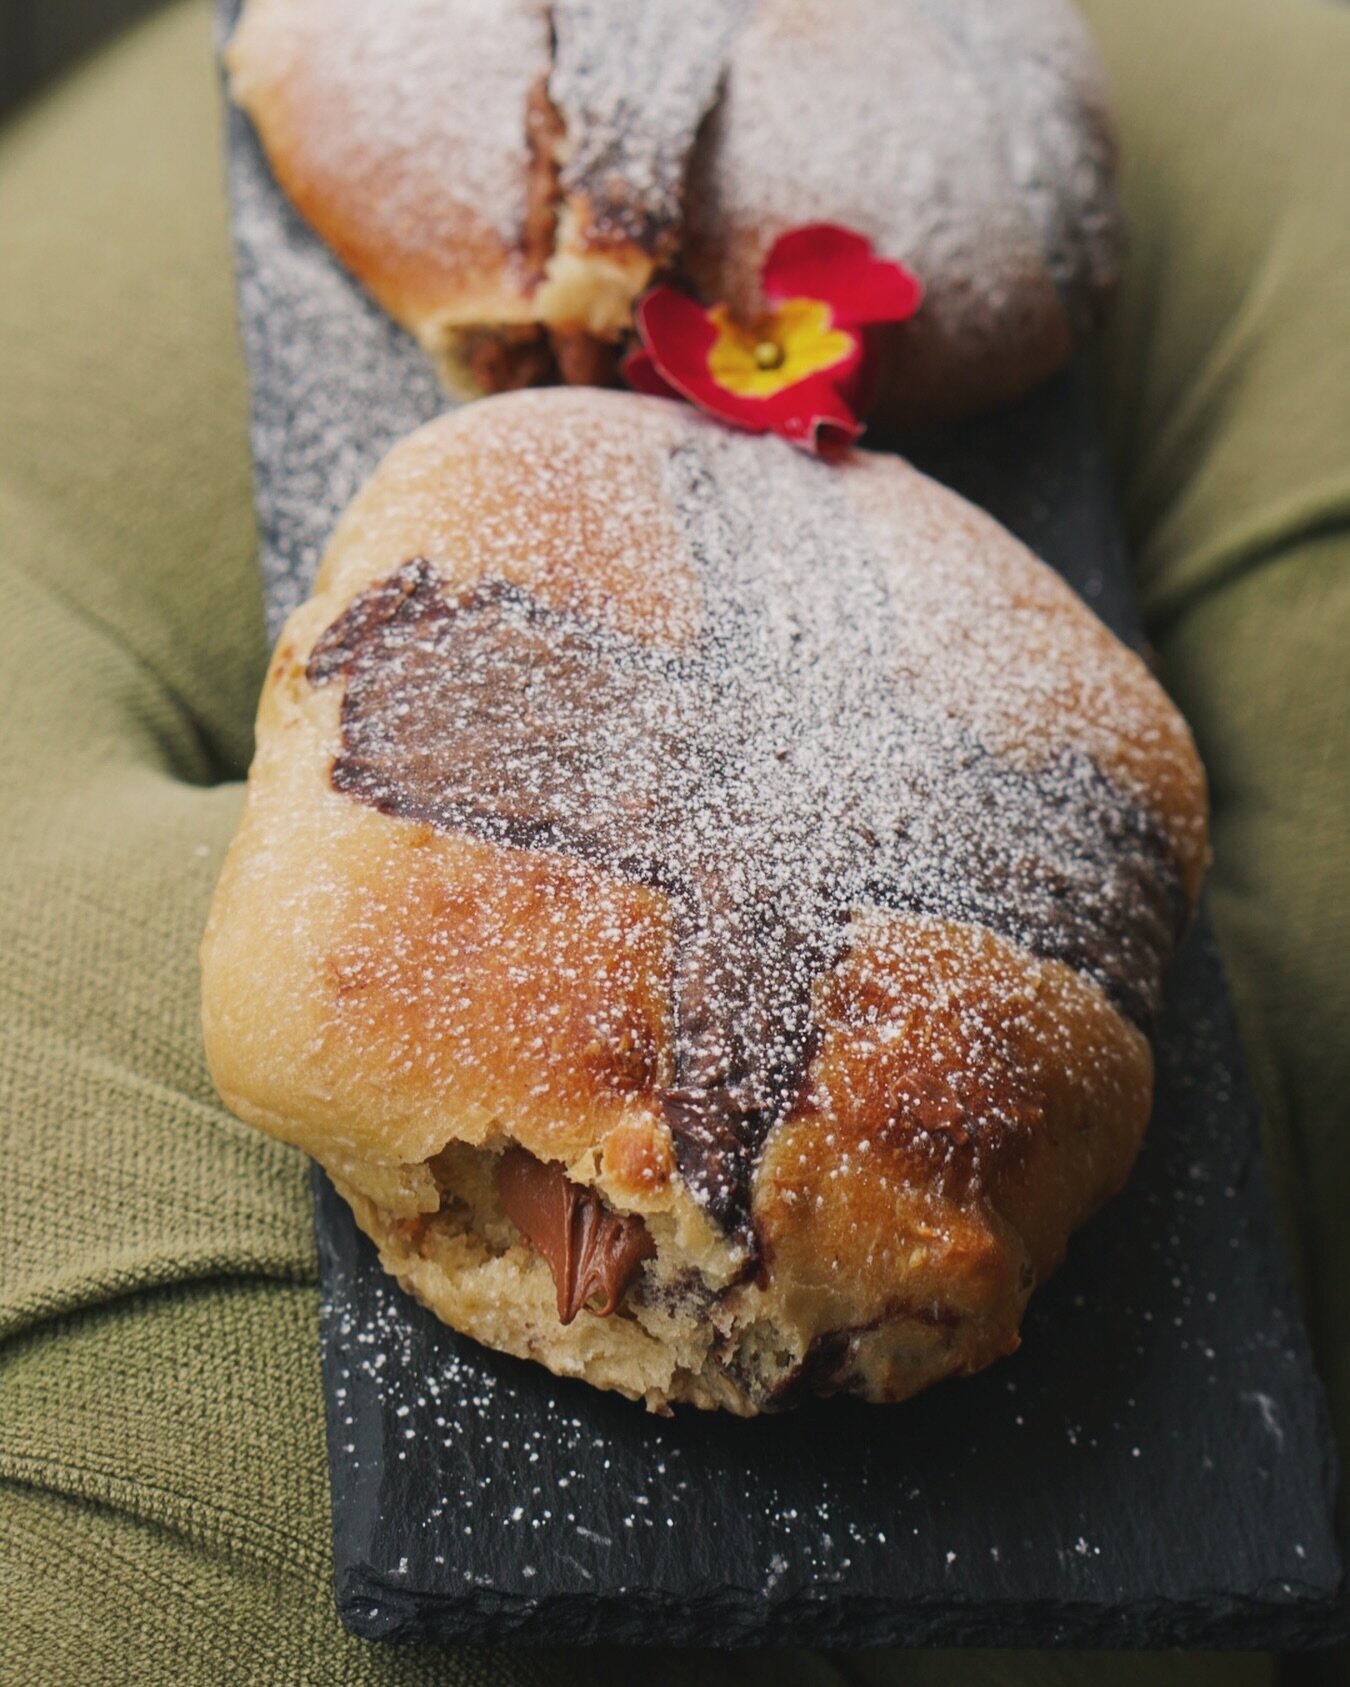 We have the perfect Easter delight coming your way!! 🐣

Banoffee hot cross buns. With a light banana and salted caramel dough, filled with chocolate, this is the ultimate Easter treat. We are going to be serving this weekend with a number of other s